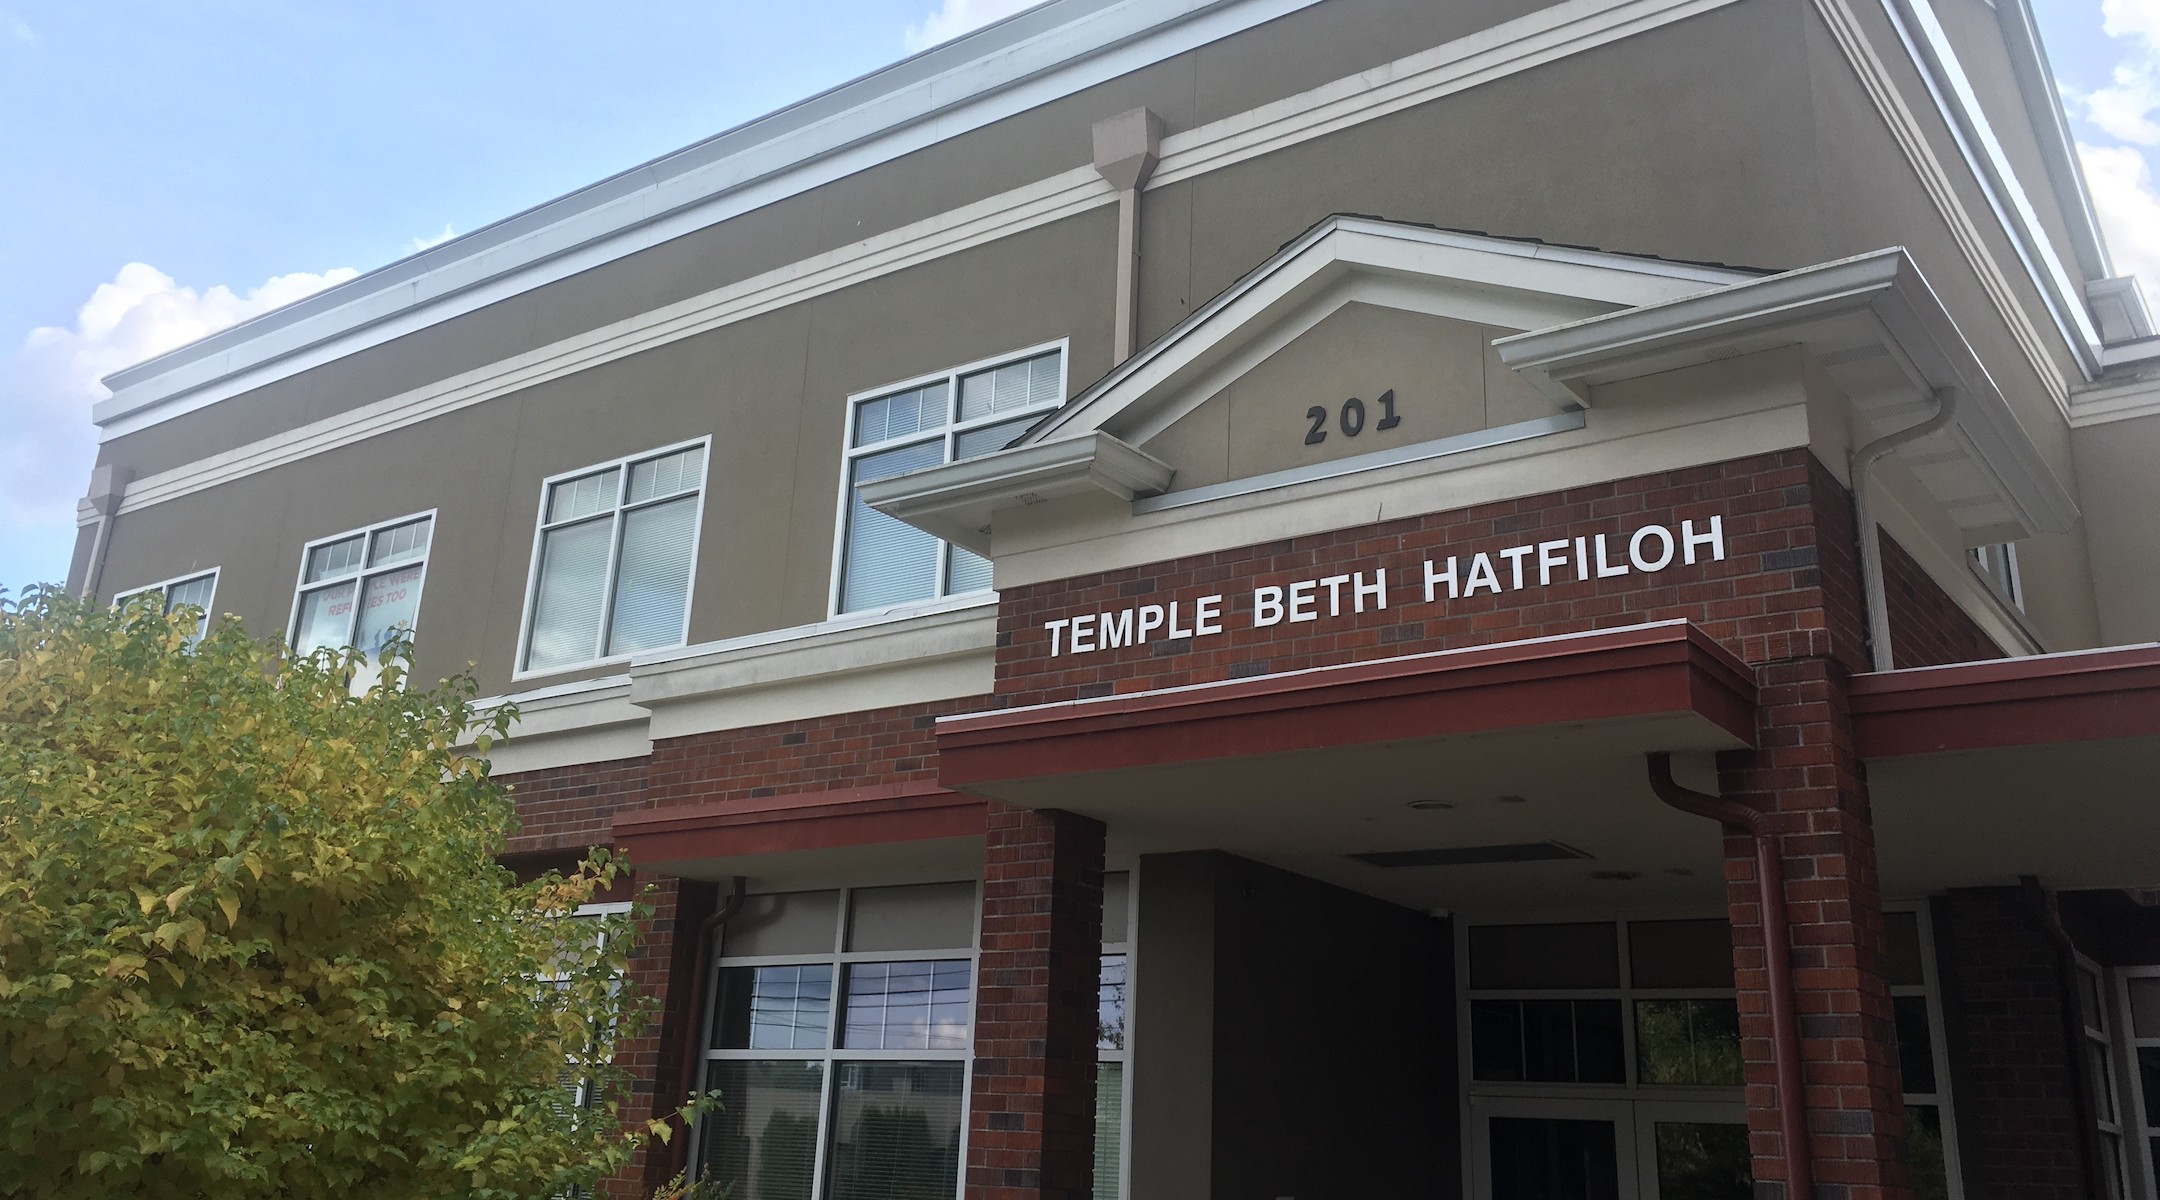 Temple Beth Hatfiloh, in Olympia, Wash., is the only synagogue in the United States known to be sheltering an undocumented immigrant. (Rabbi Seth Goldstein)